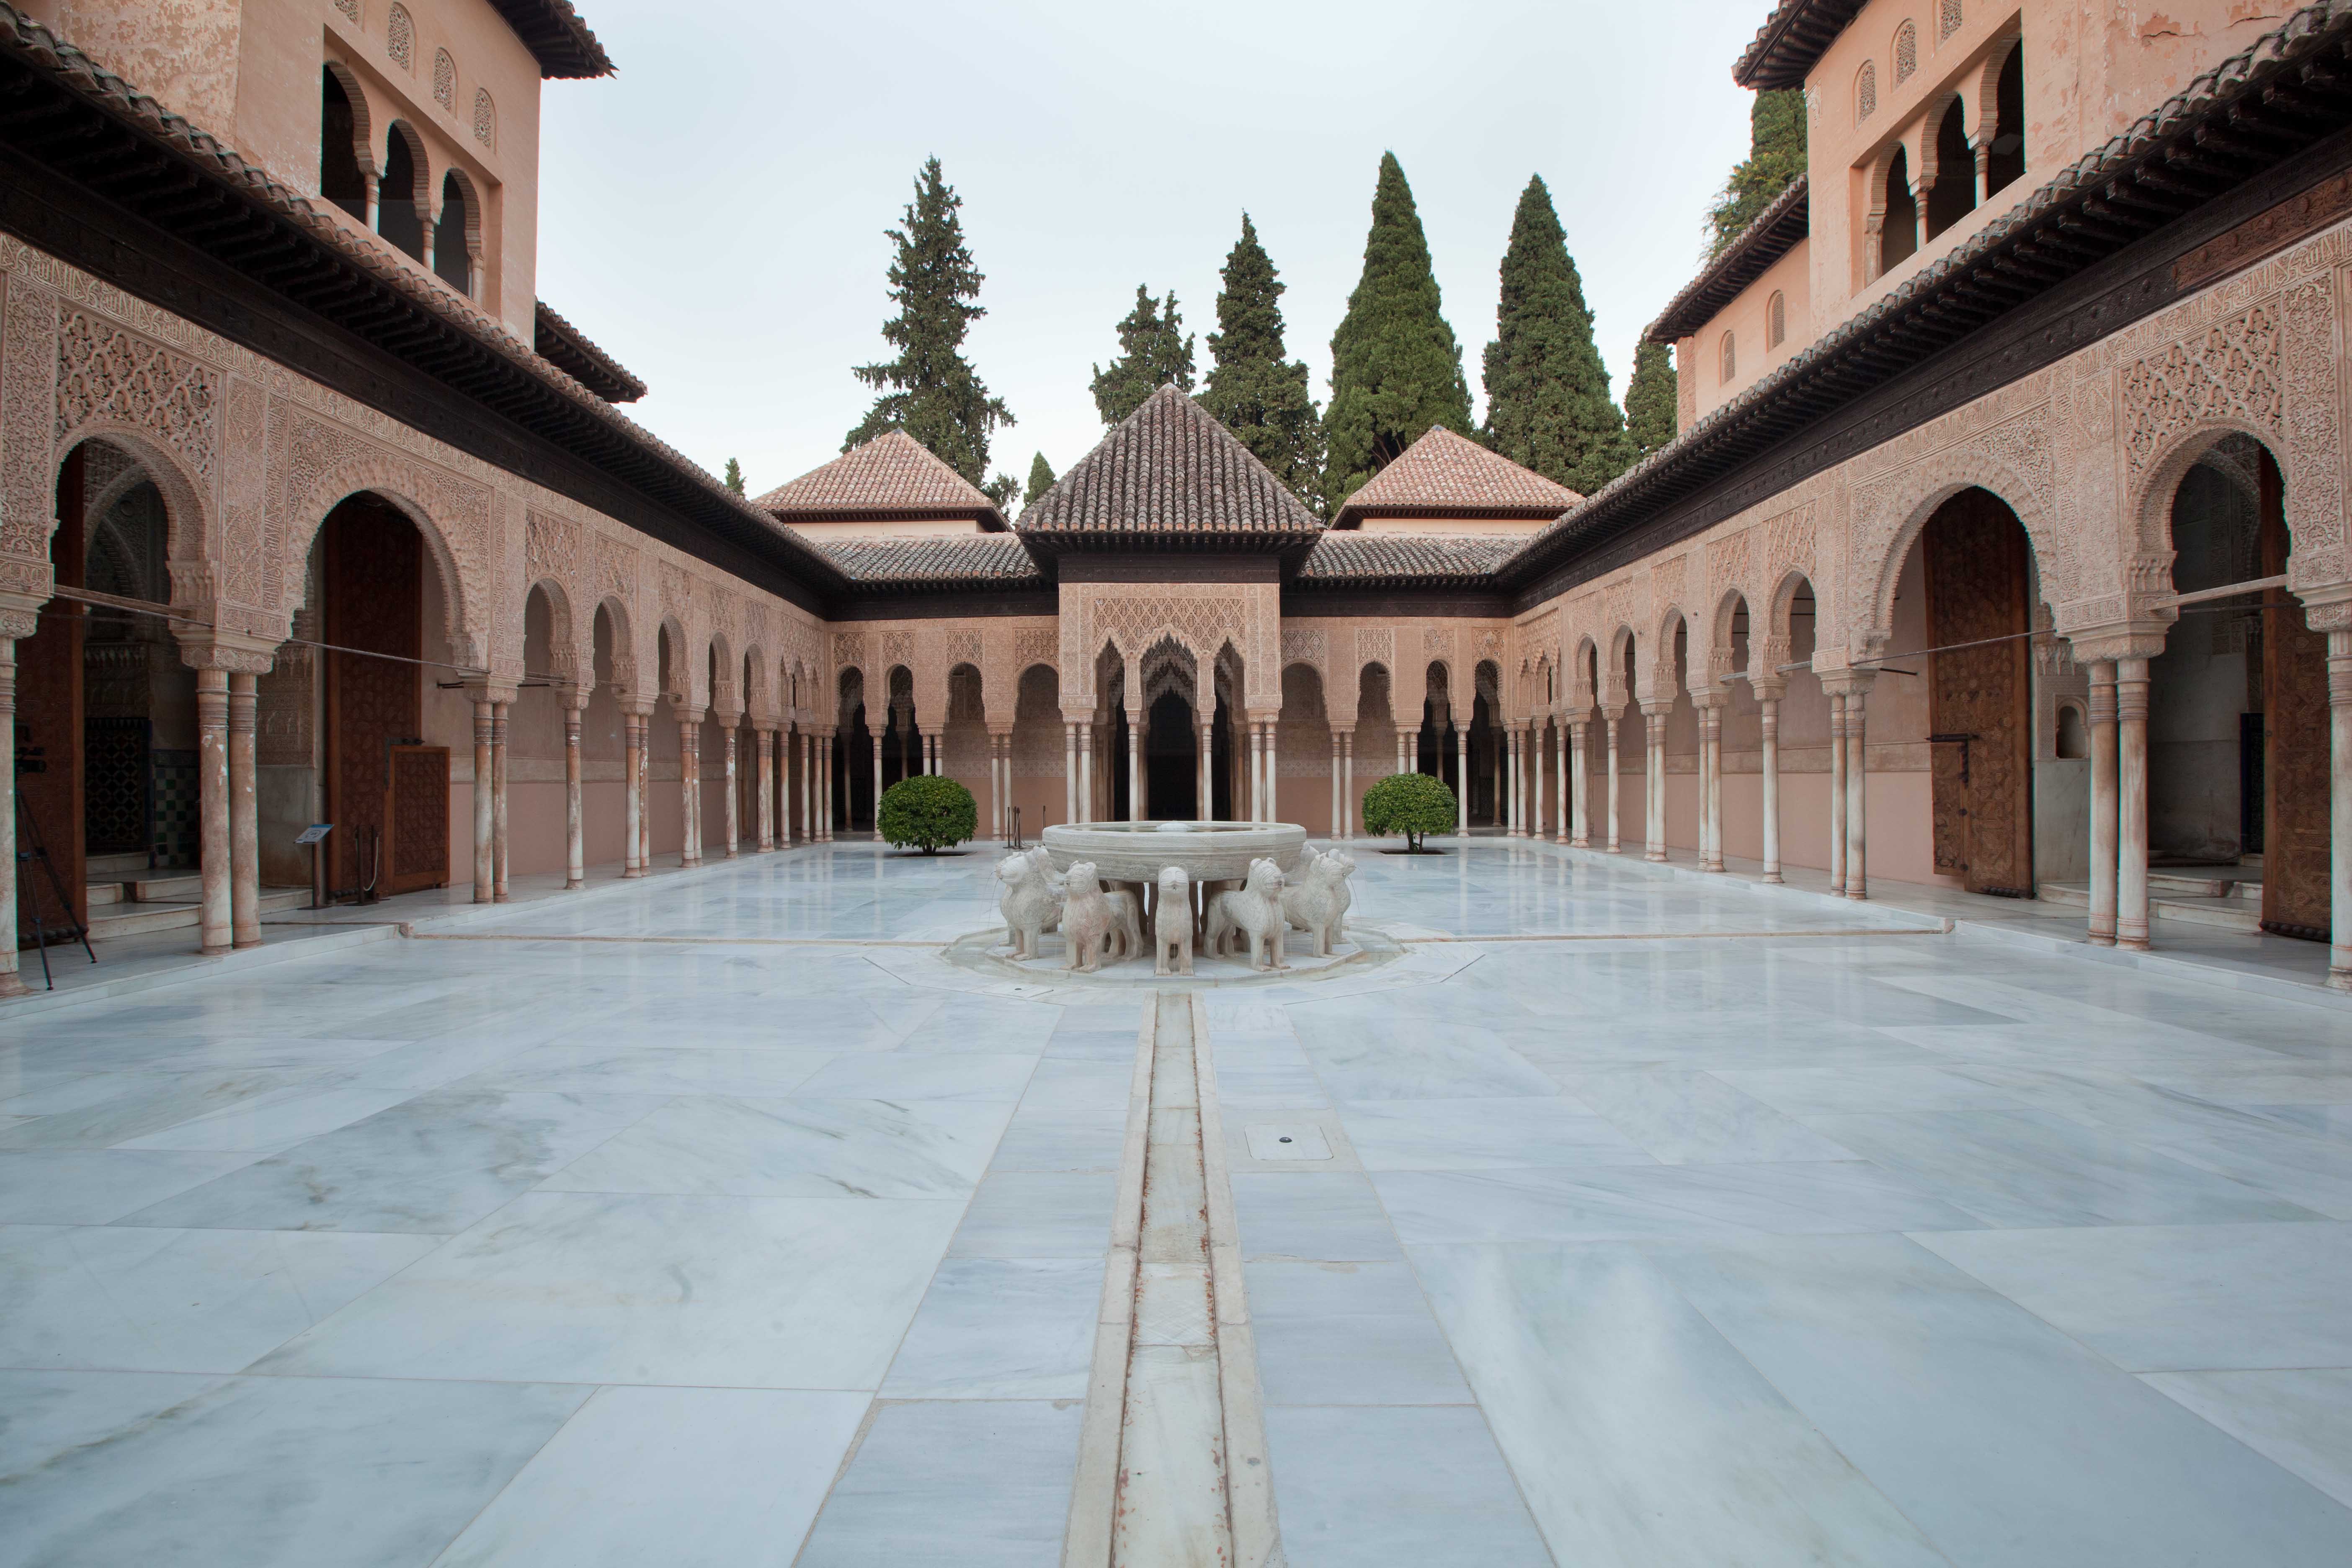 The Courtyard of the Lions receives an award from the Andalusia Marble Federation